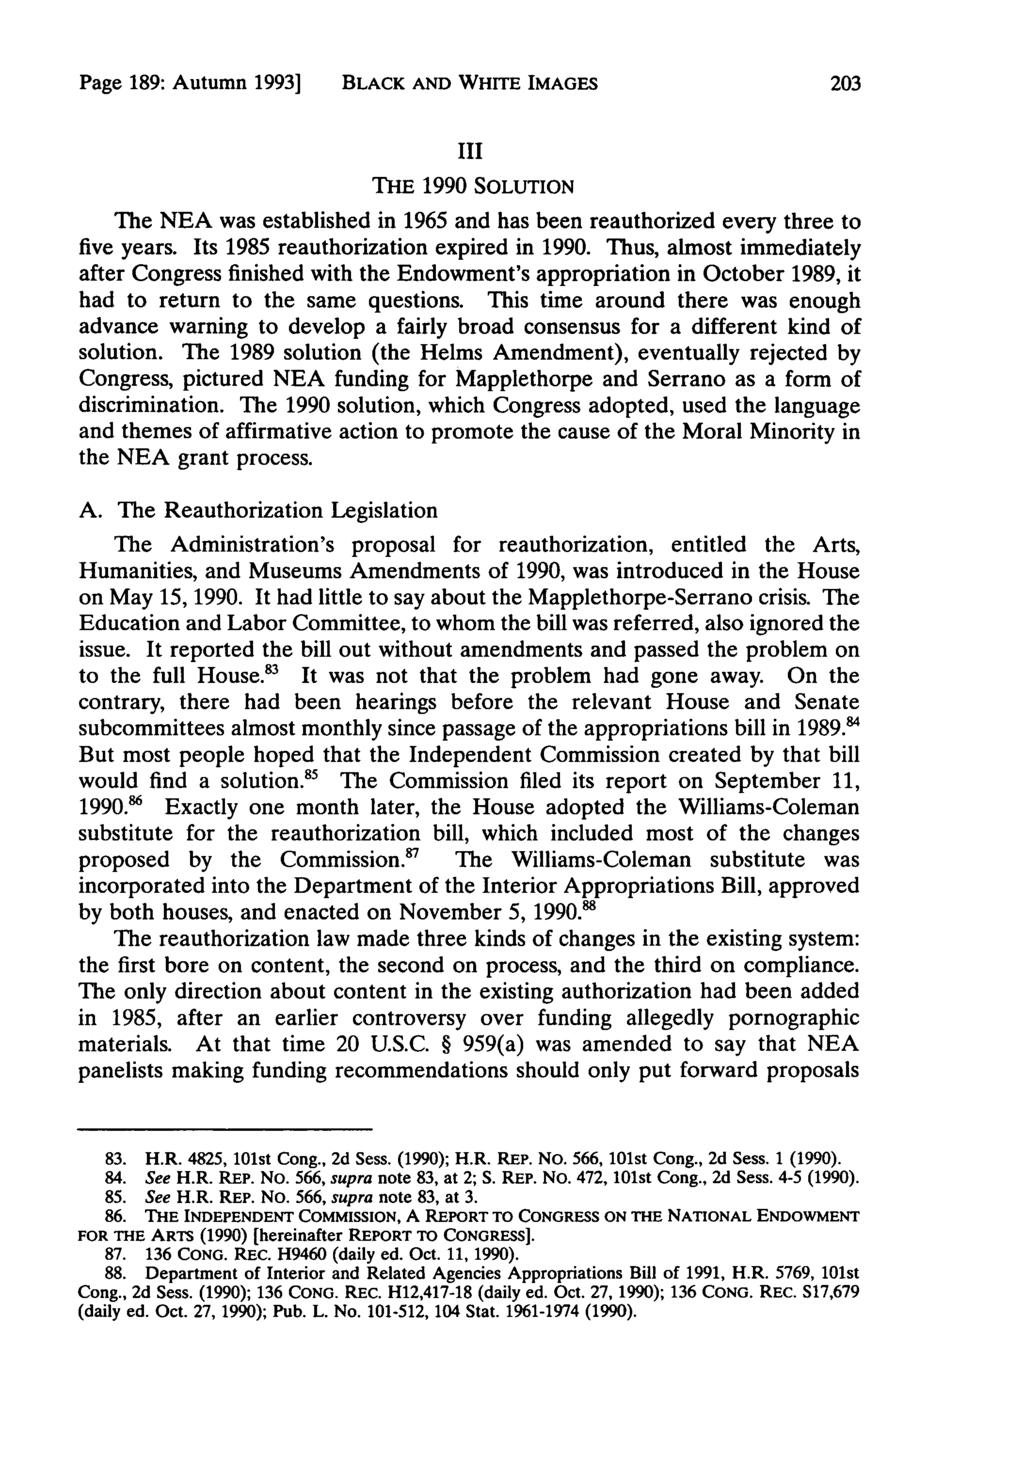 Page 189: Autumn 1993] BLACK AND WHITE IMAGES III THE 1990 SOLUTION The NEA was established in 1965 and has been reauthorized every three to five years. Its 1985 reauthorization expired in 1990.